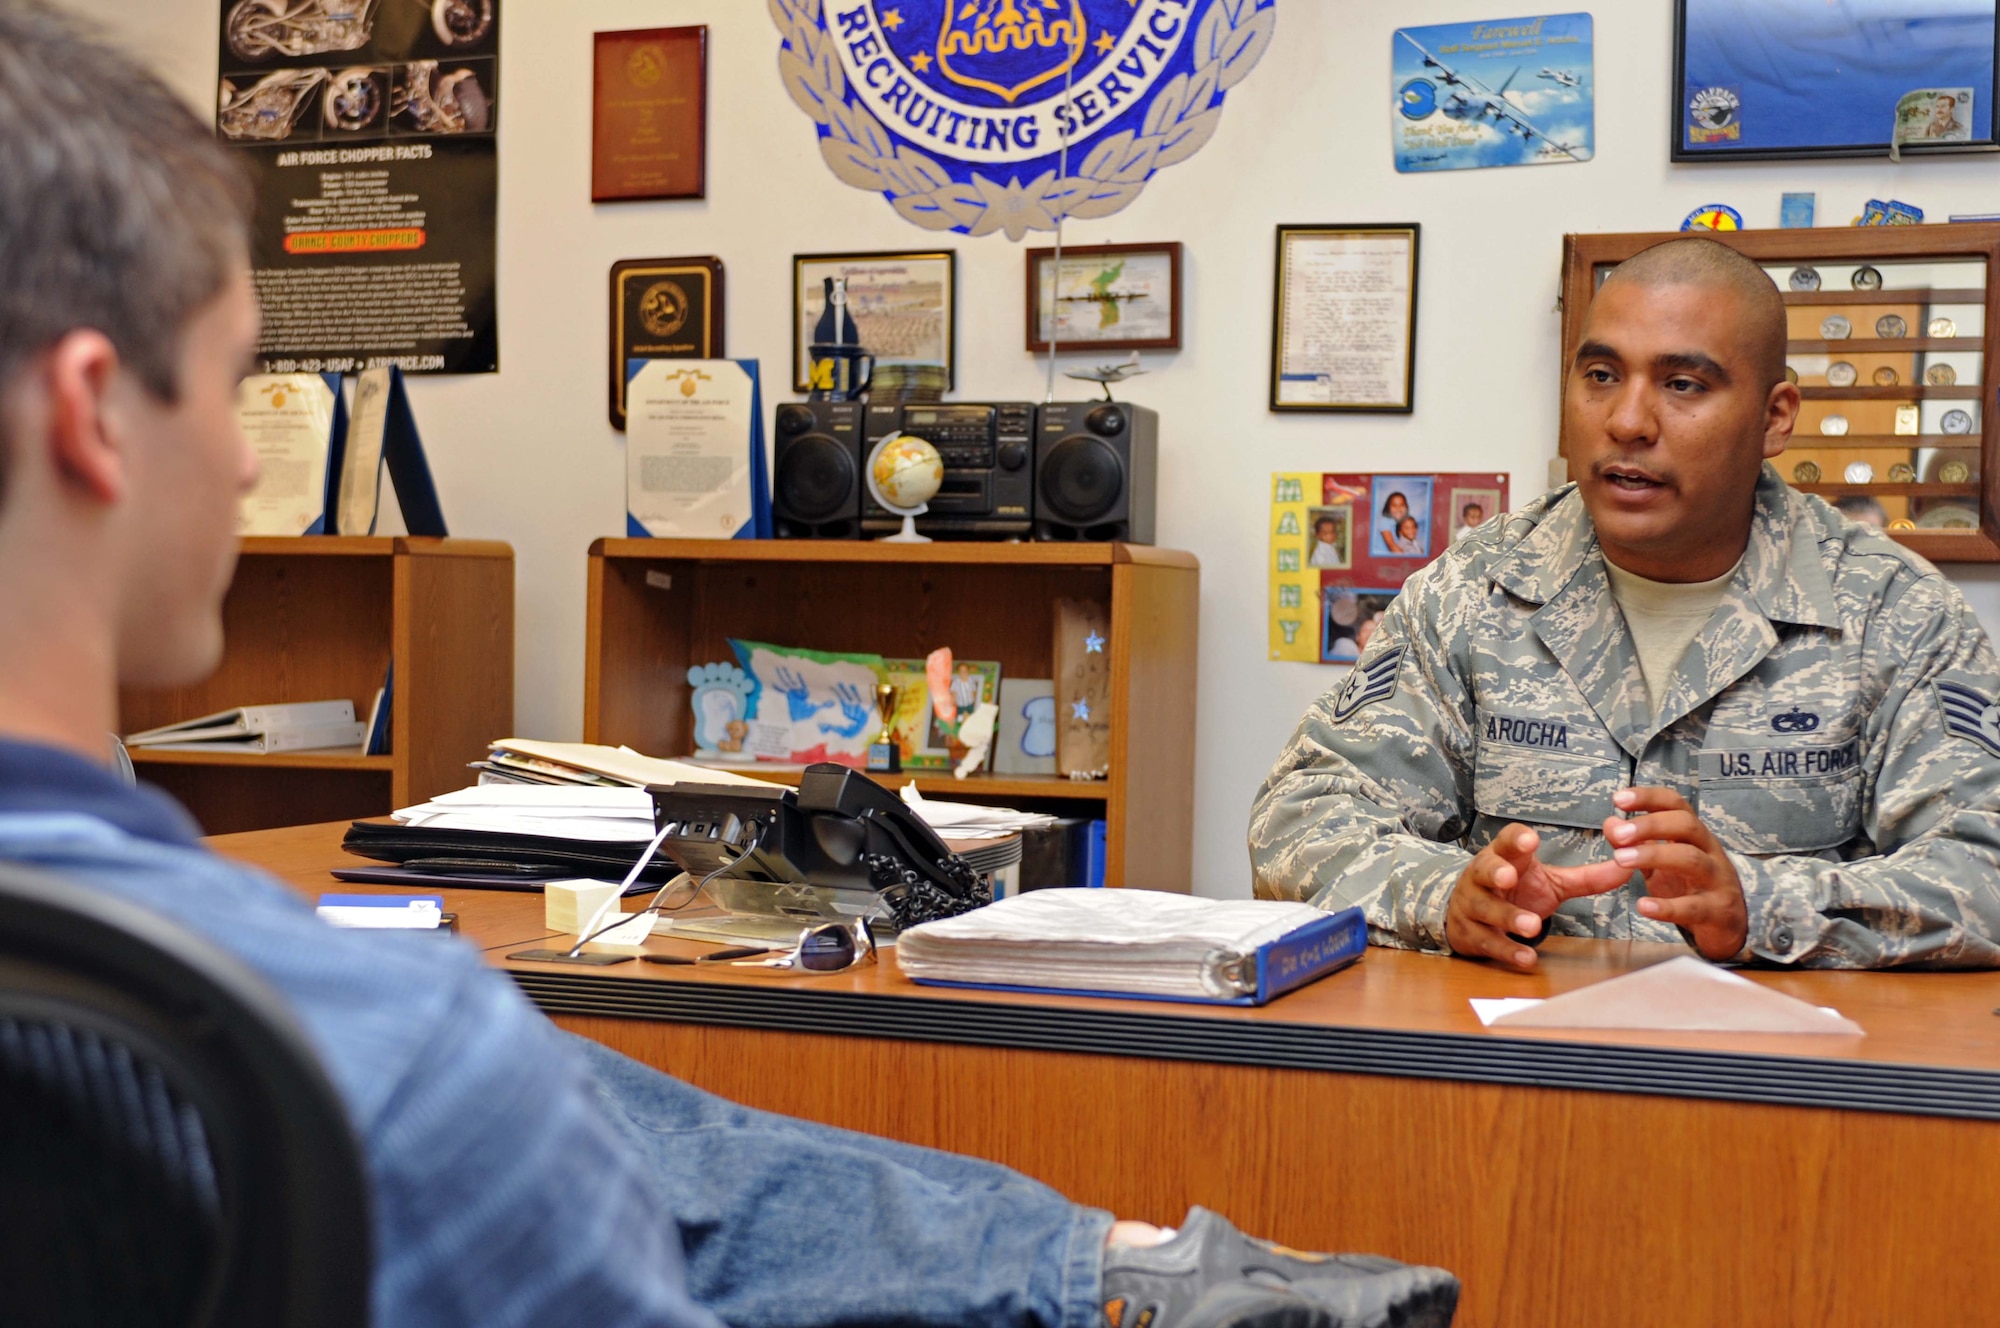 Staff Sgt. Manuel Arocha, 343th Recruiting Squadron Air Force recruiter, speaks with Jared Wiley, a Rapid City native, about joining the Air Force Aug. 20. Sergeant Arocha's recruiting office is located in the Rushmore Mall in Rapid City, S.D. (U.S. Air Force photo/Airman Corey Hook)